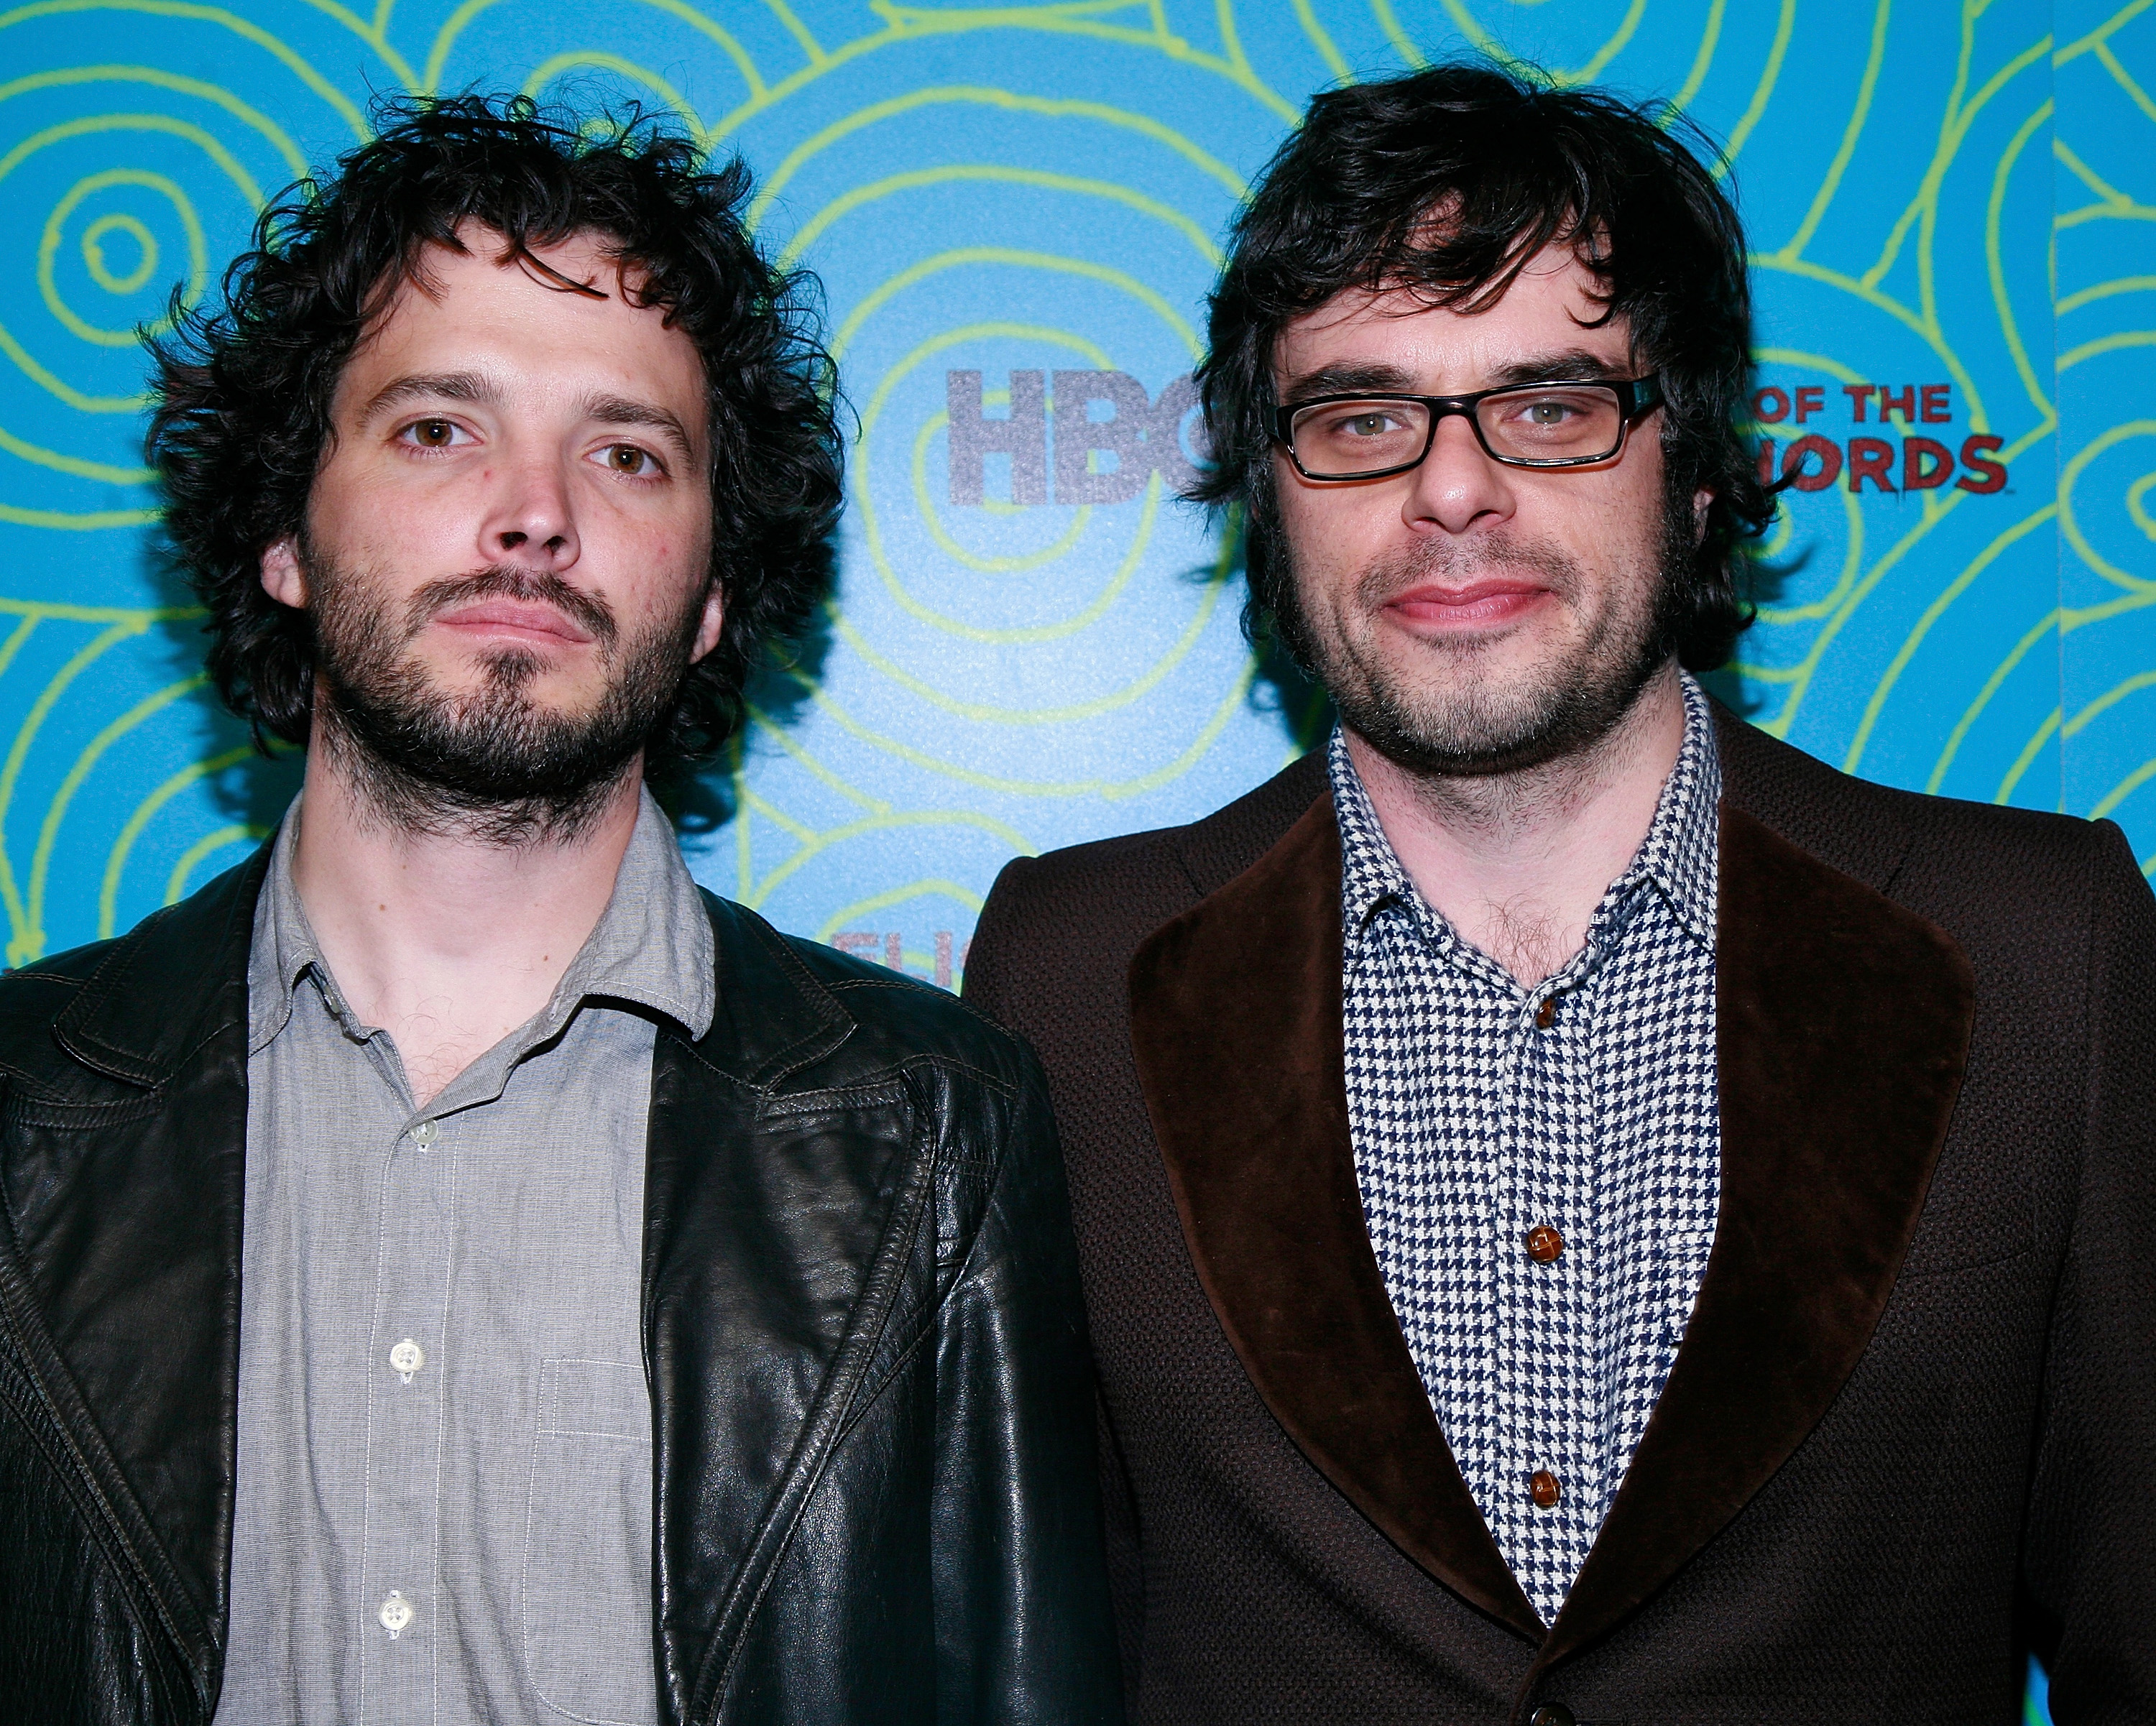 Flight of the conchords songs